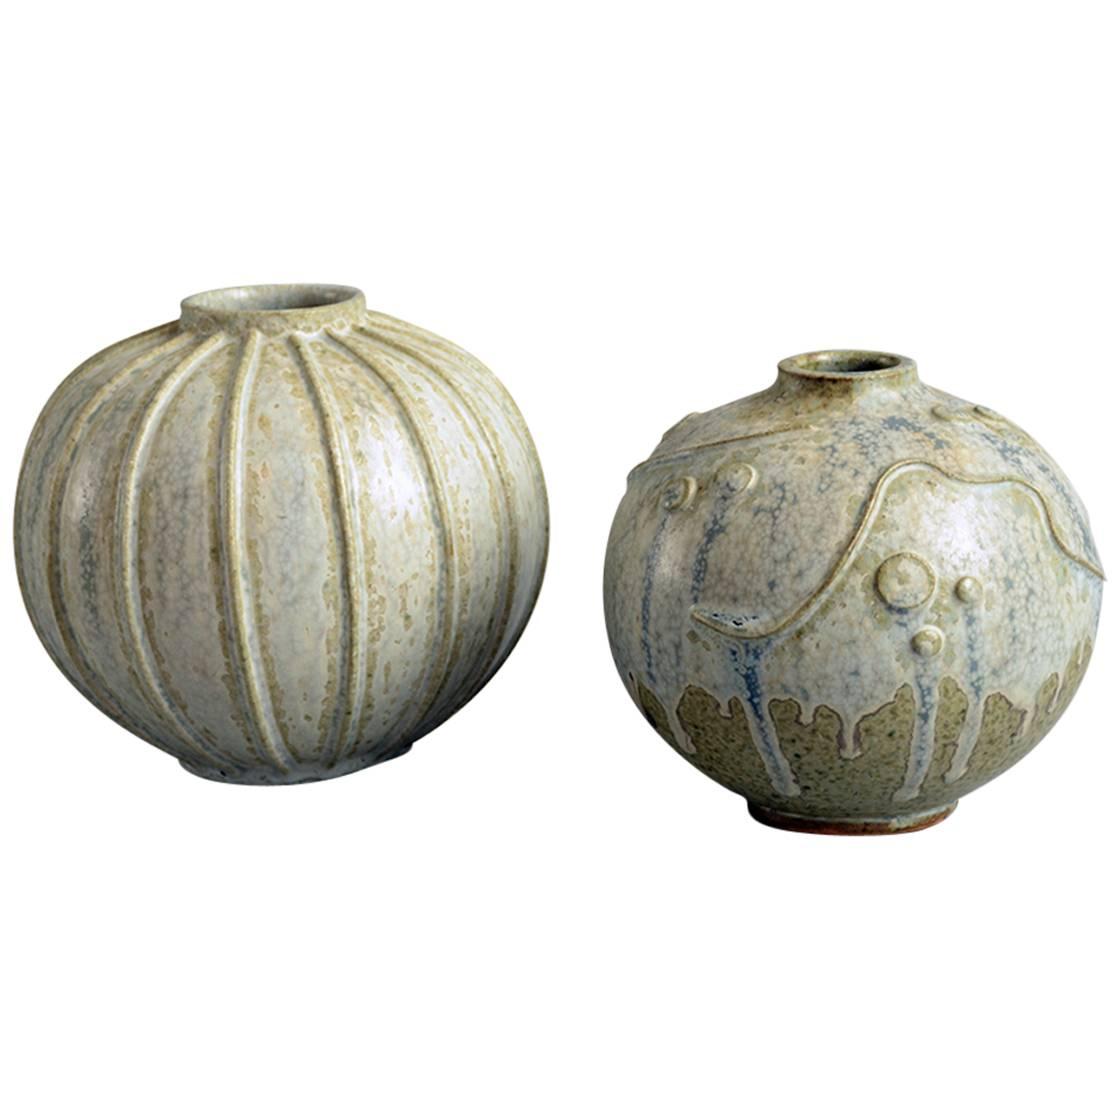 Two Spherical Vases with Crystalline Glaze by Arne Bang